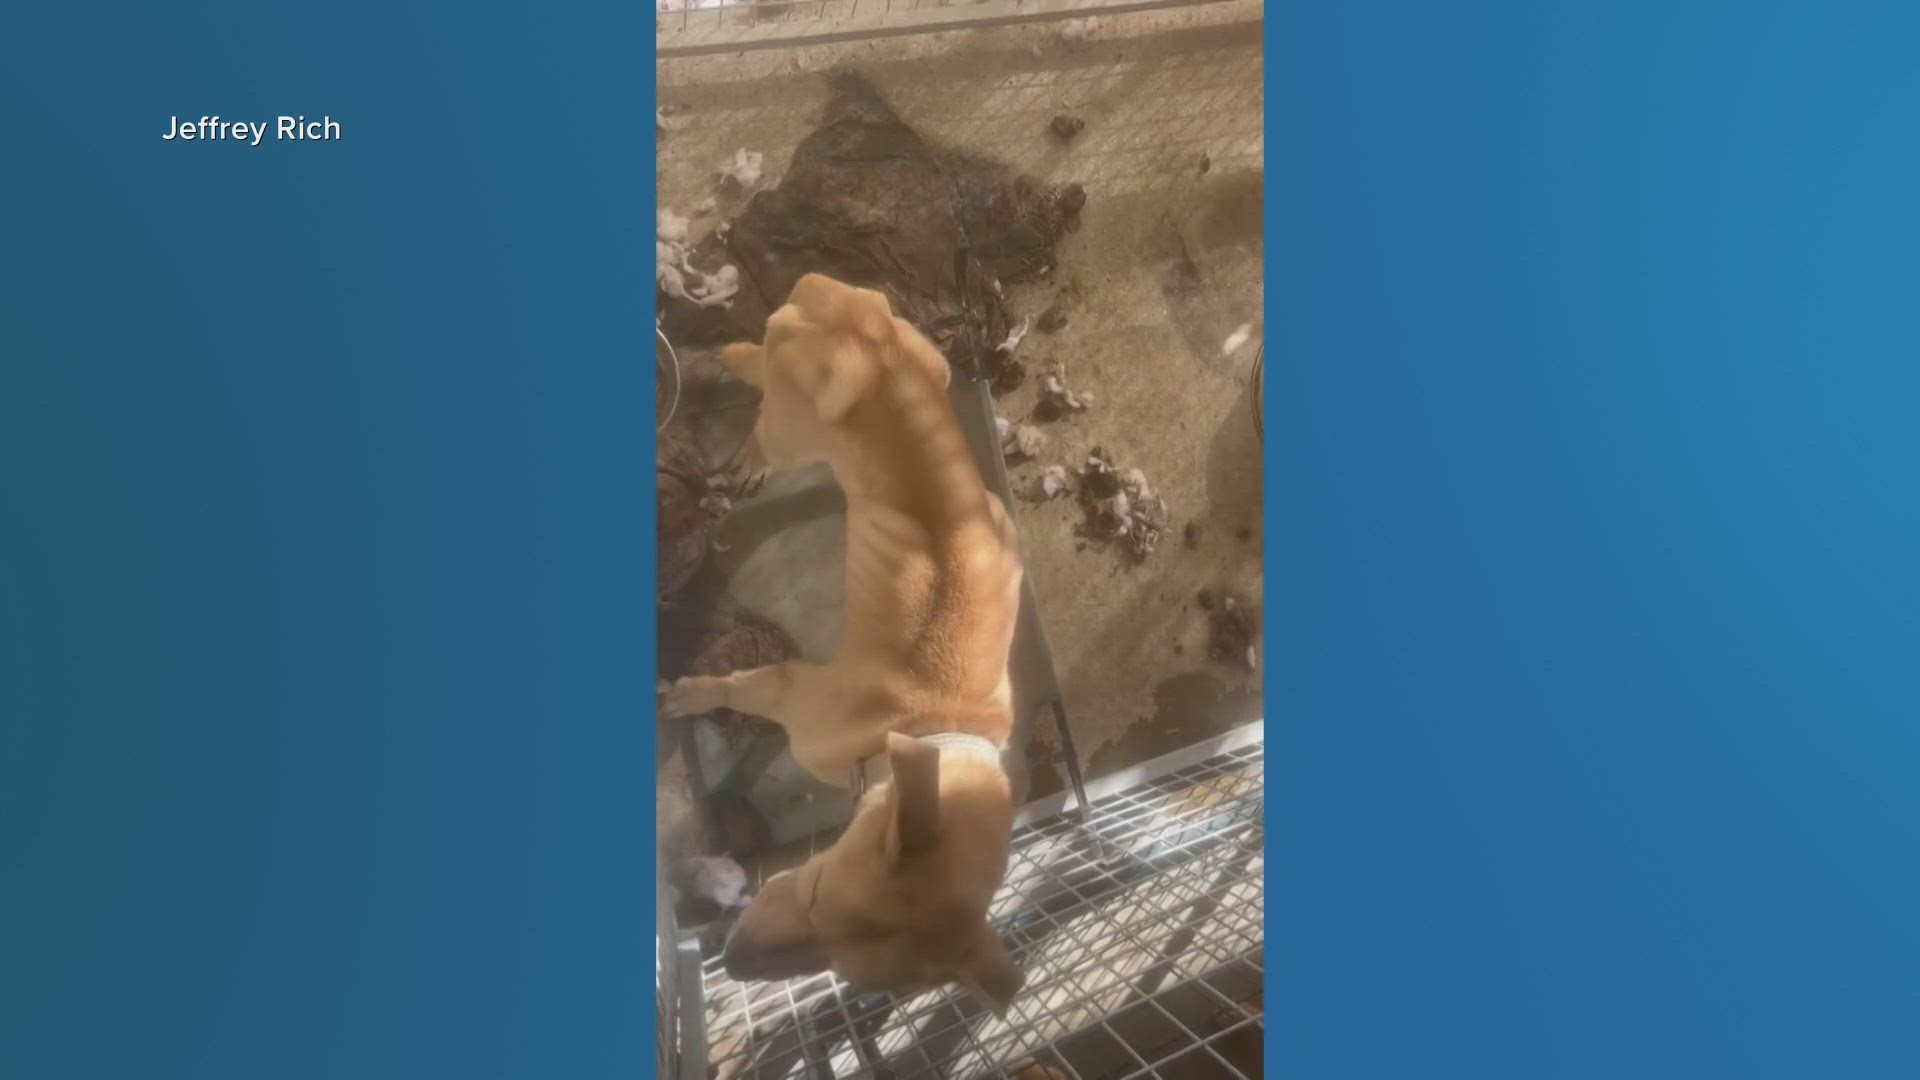 The graphic videos and images show dogs at the animal shelter appearing malnourished and living amongst their own feces.